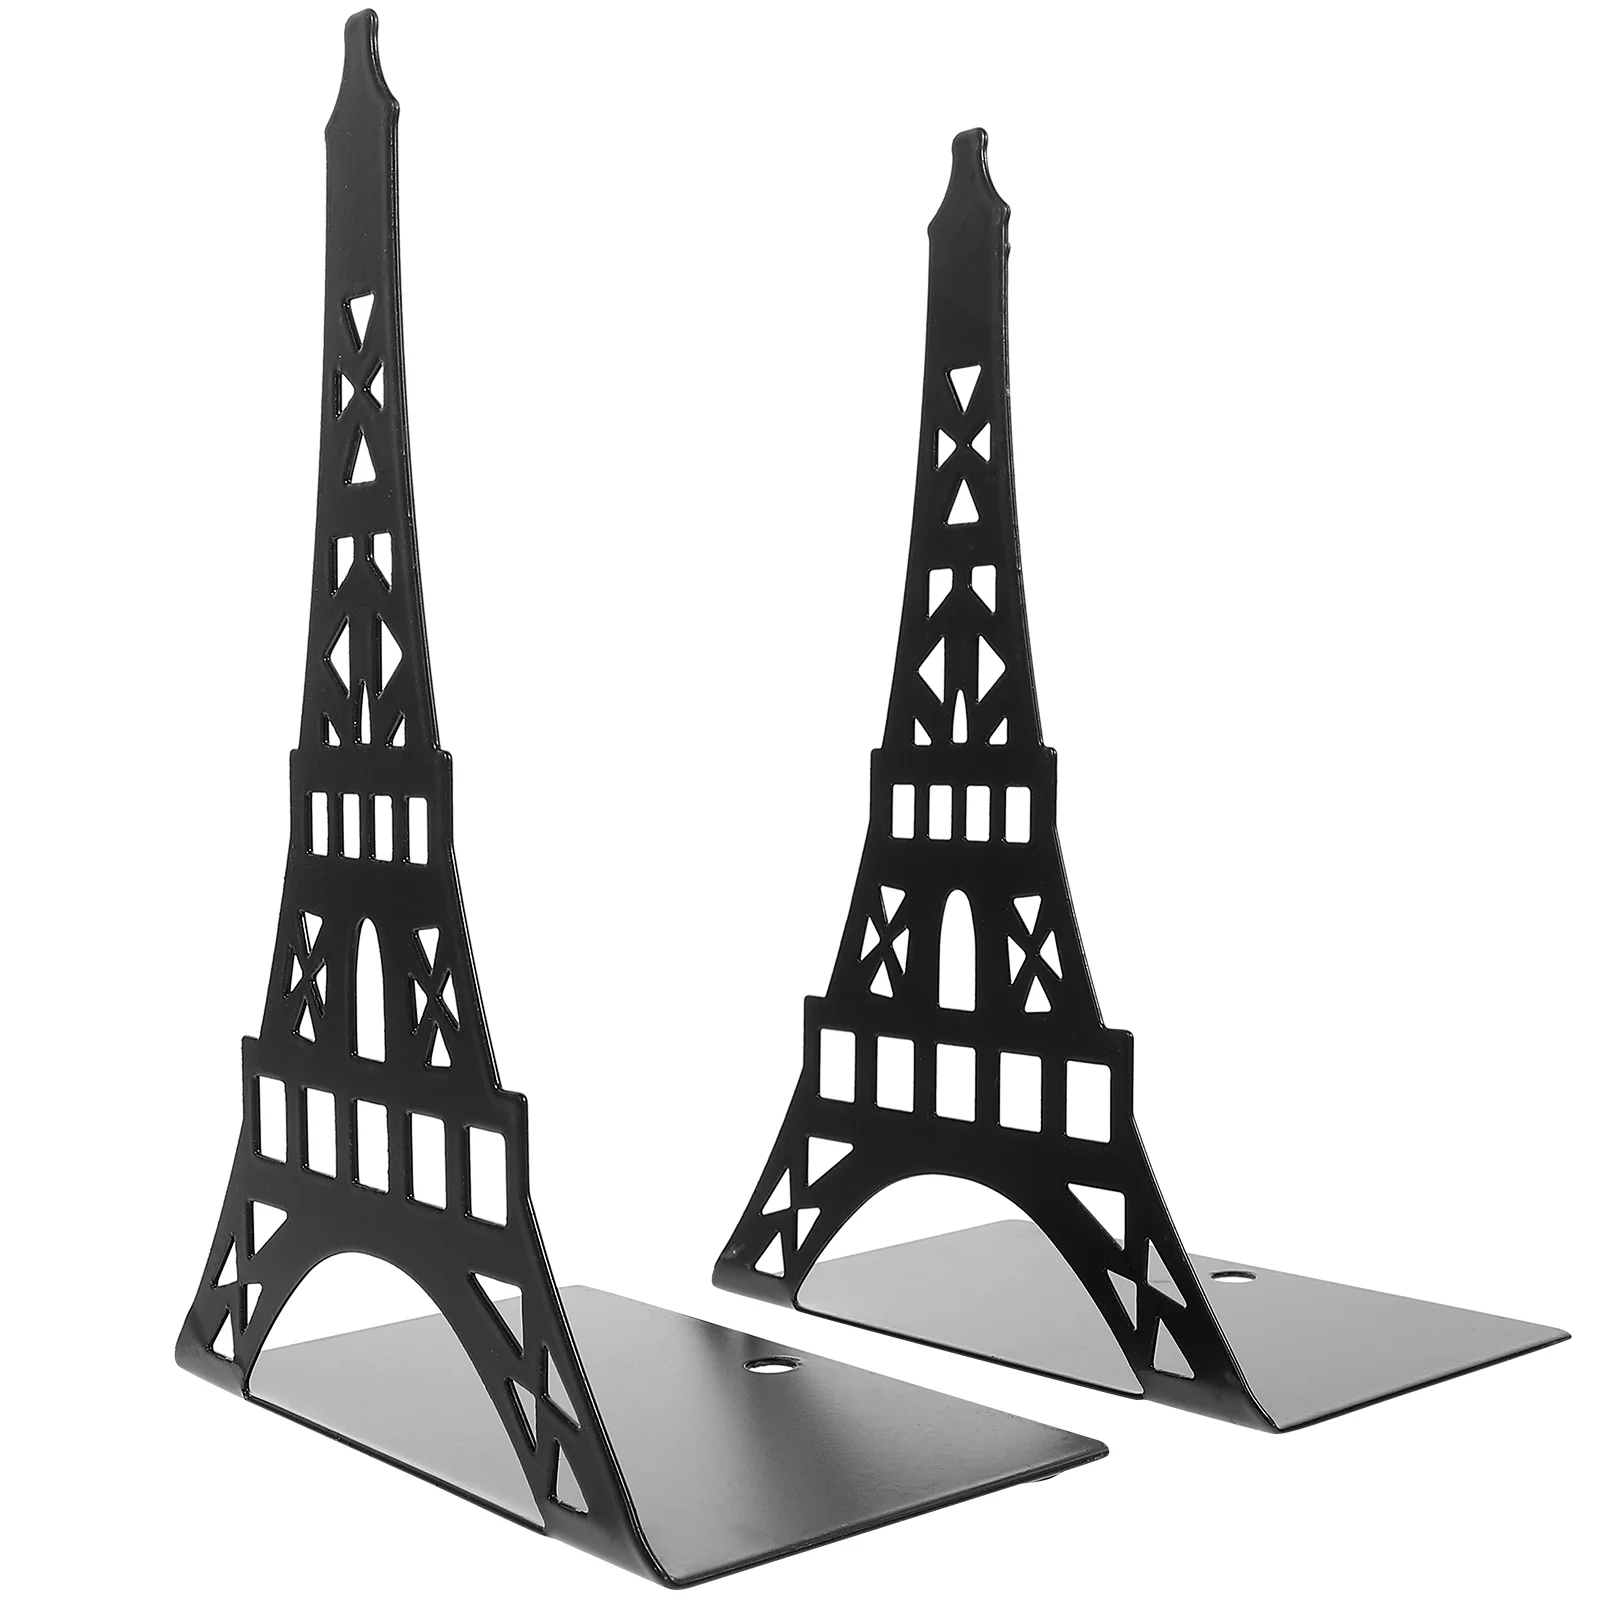 

Bookend Tabletop Decor Holders Non-Slip Bookends File Implement Reusable Hollow-out Art Metal Tower Shape Stands